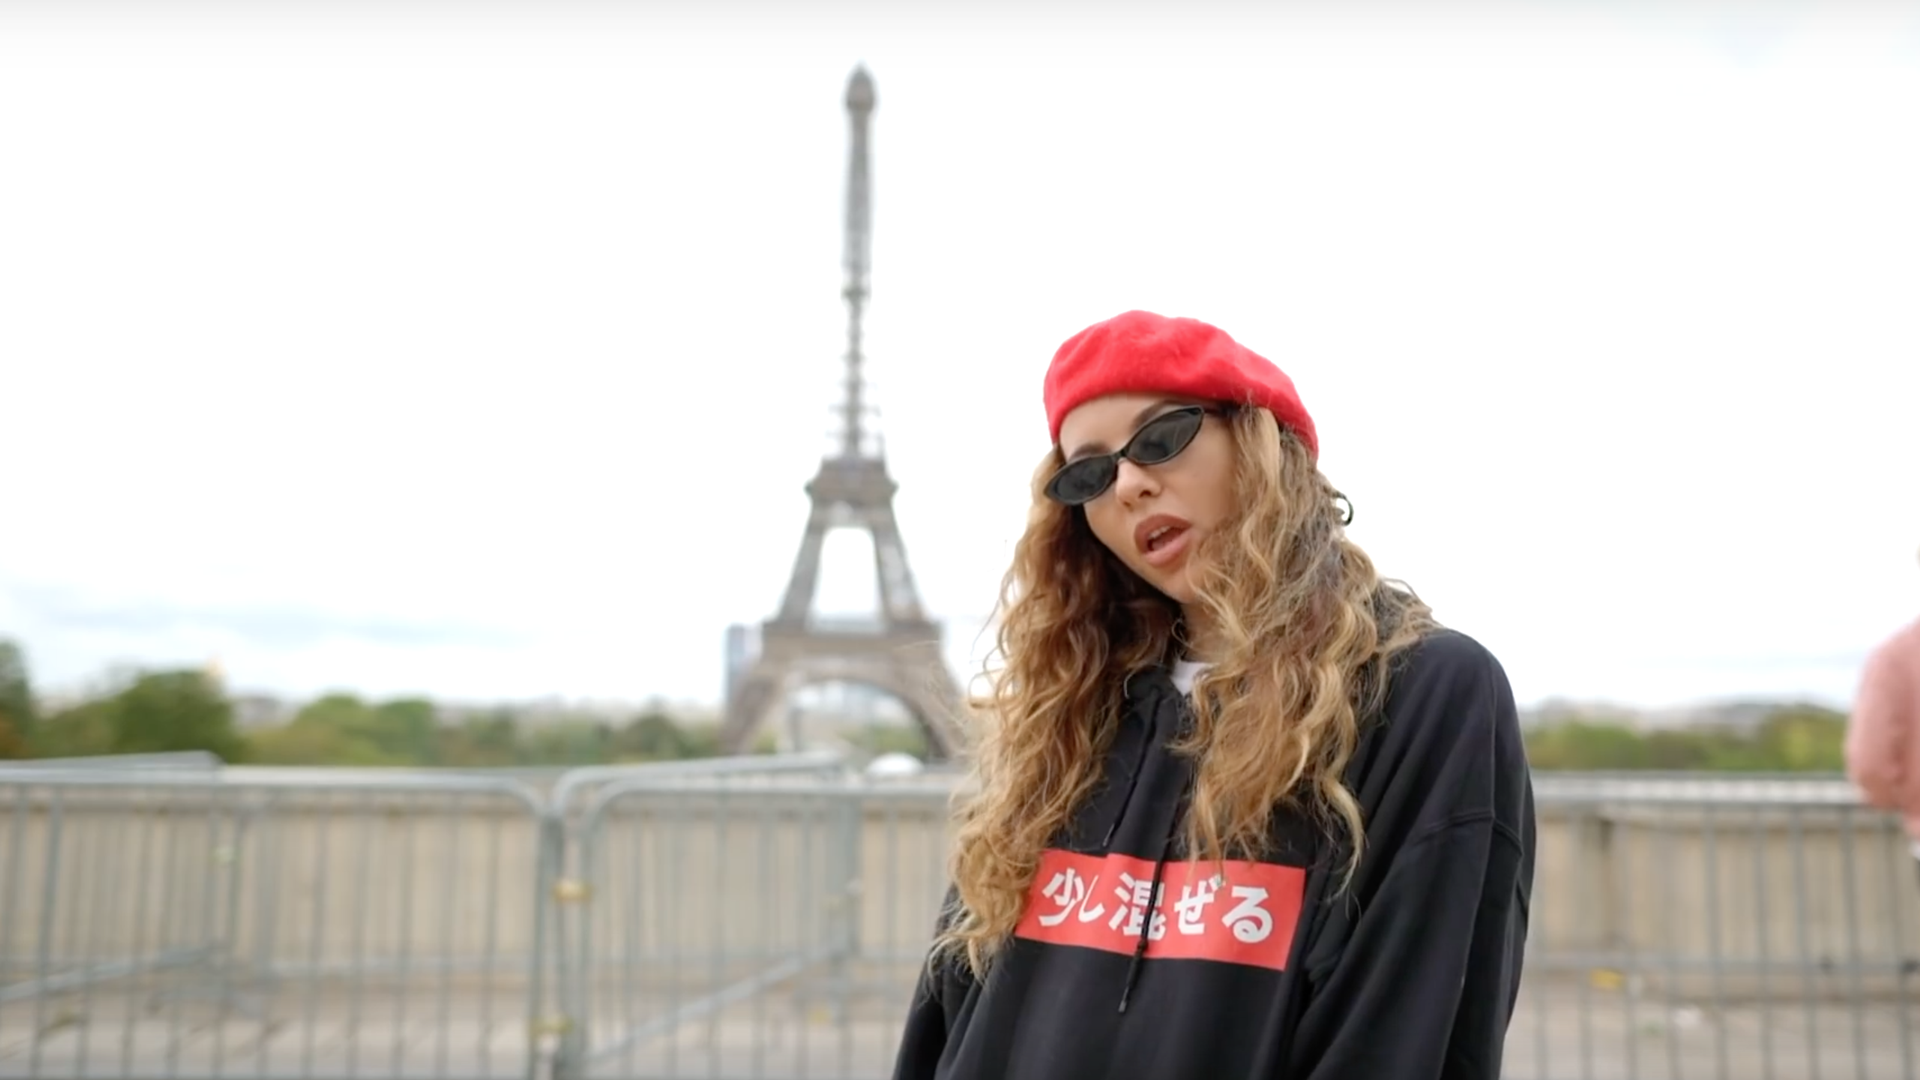 Jade at the Eiffel Tower